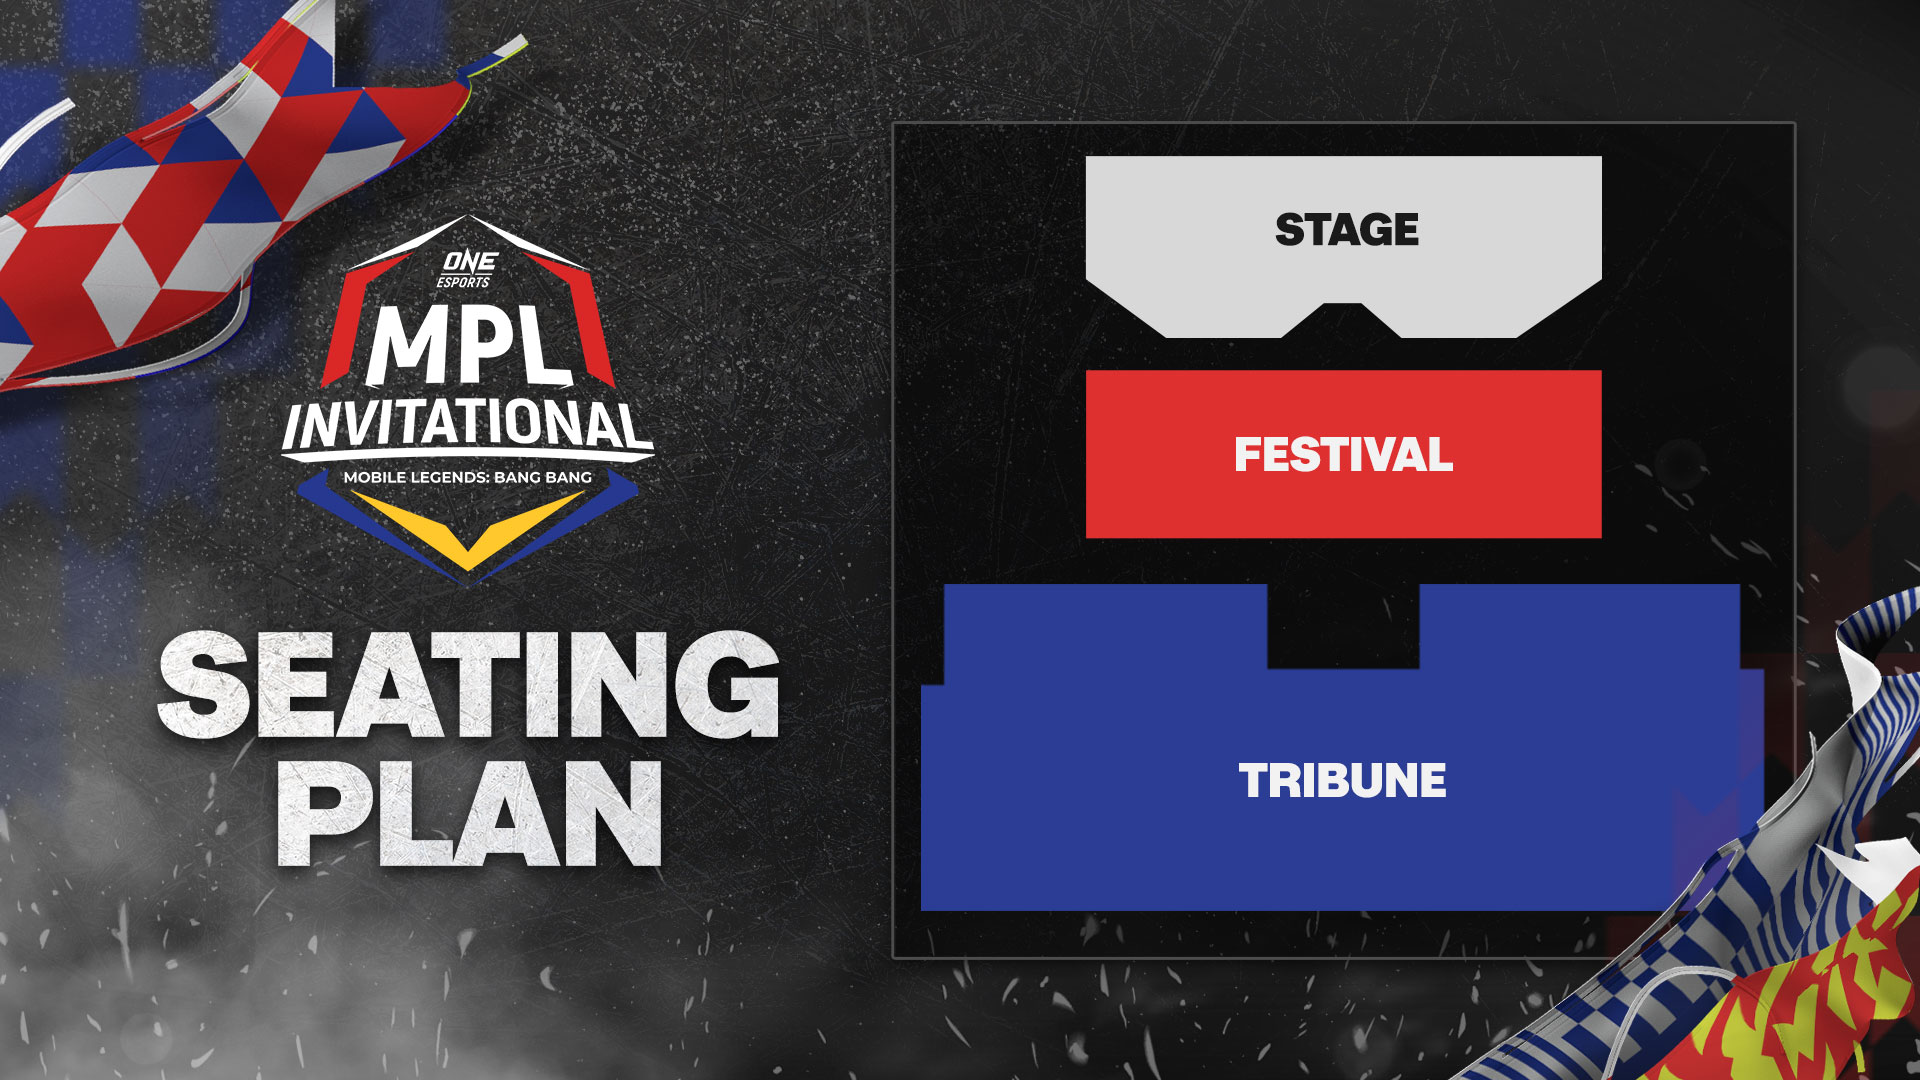 ONE Esports Unveils Ticket Sales for ONE Esports MPL Invitational 2023 Seating Plan